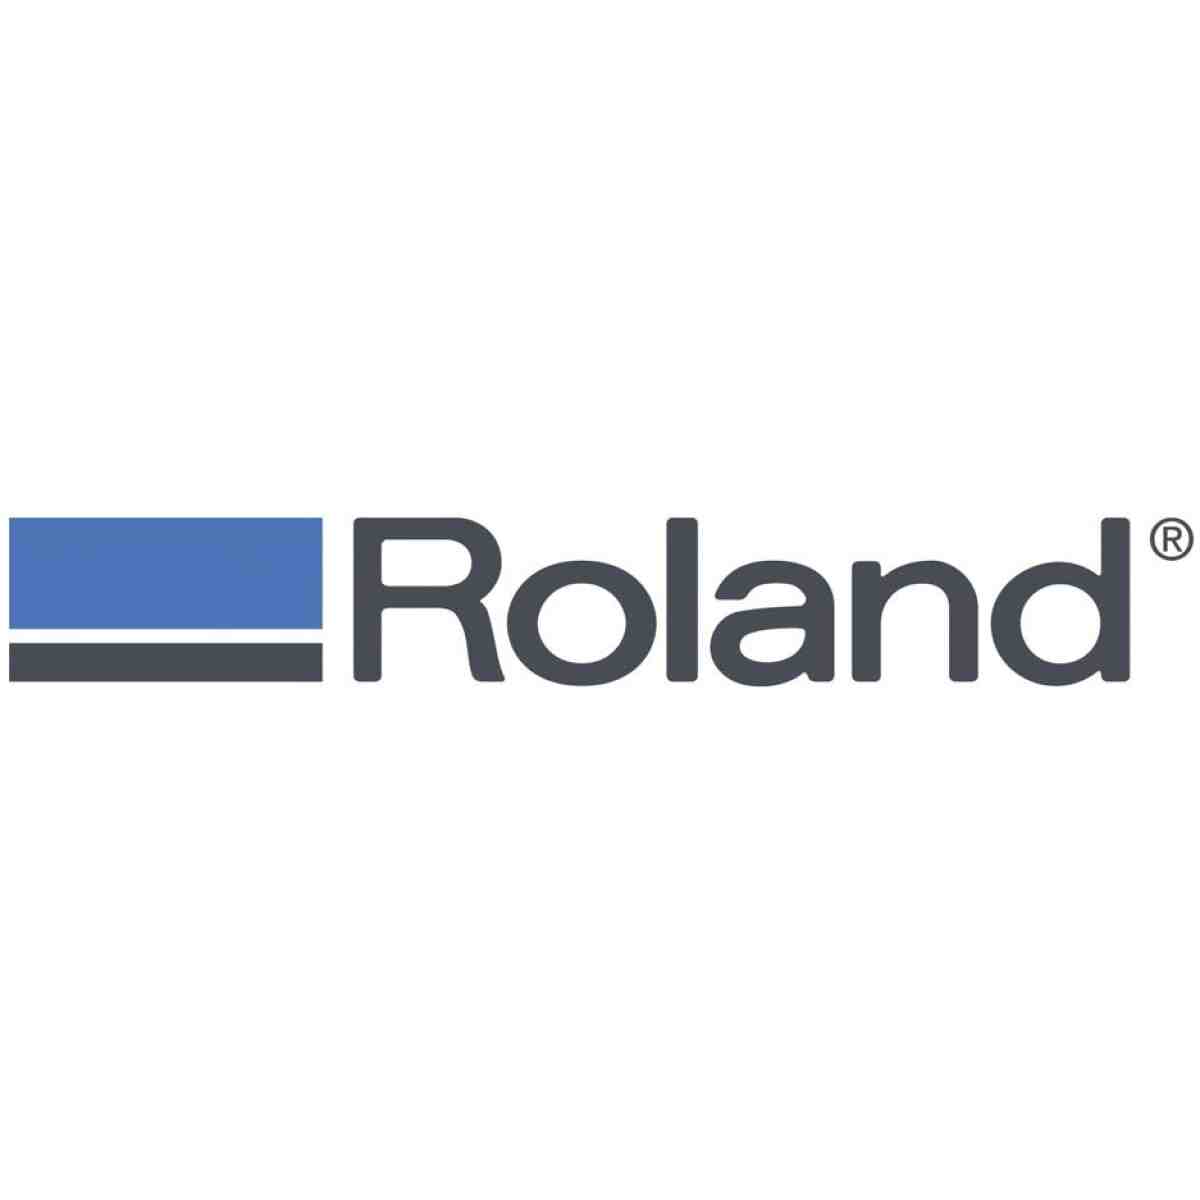 Roland Kit, Cleaning (Esl5) 100 Ml, Includes Cleaning Fluid And 10 Swaps ROLAND®